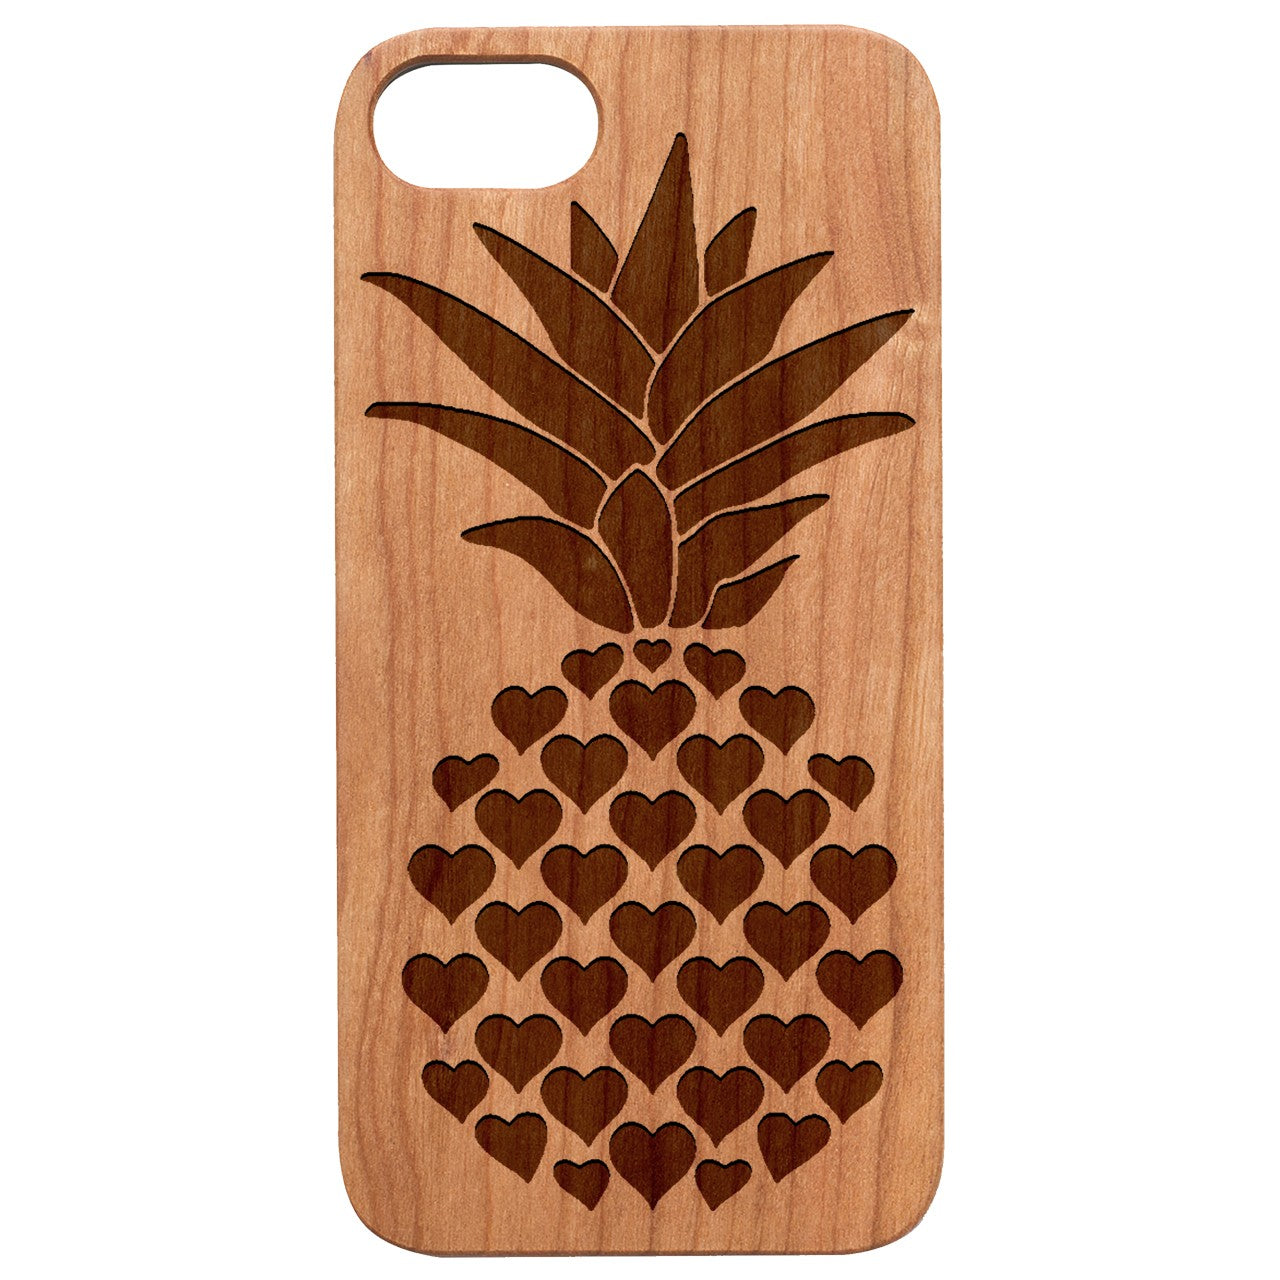  Heart Pineaple - Engraved - Wooden Phone Case - IPhone 13 Models